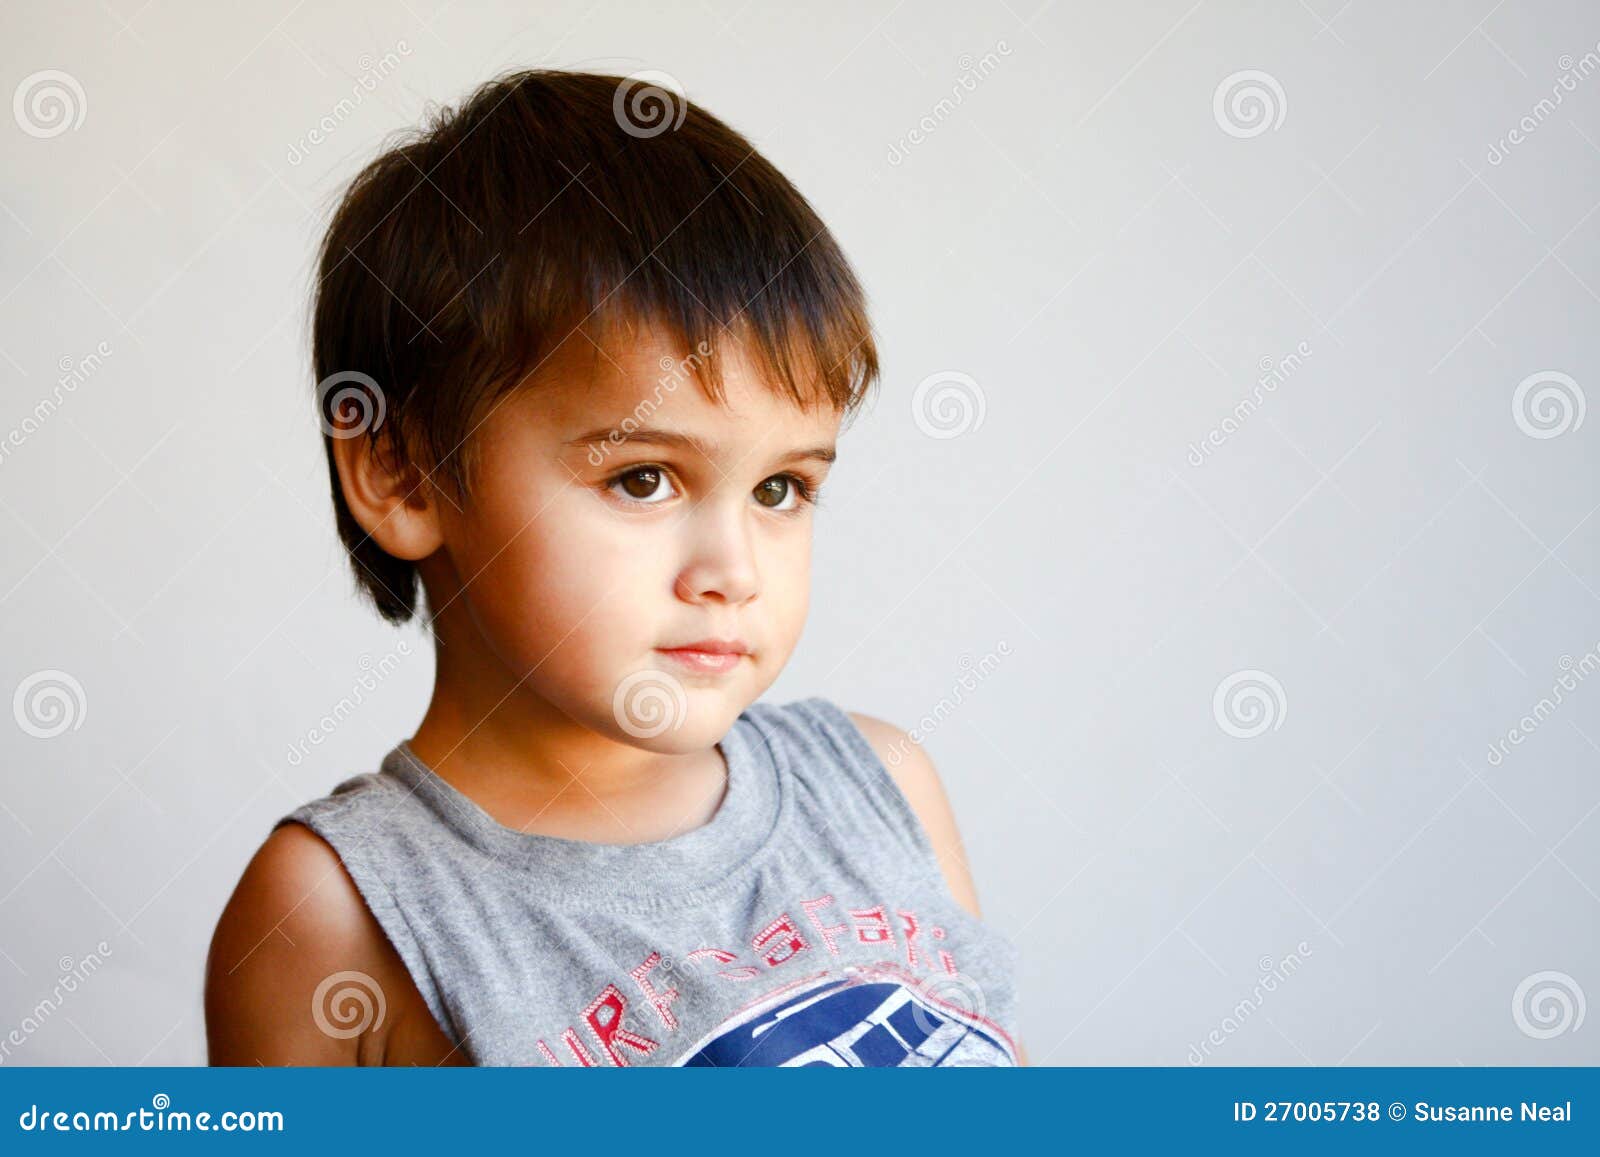 Portrait Of Cute Little Boy Stock Photo Image Of Handsome